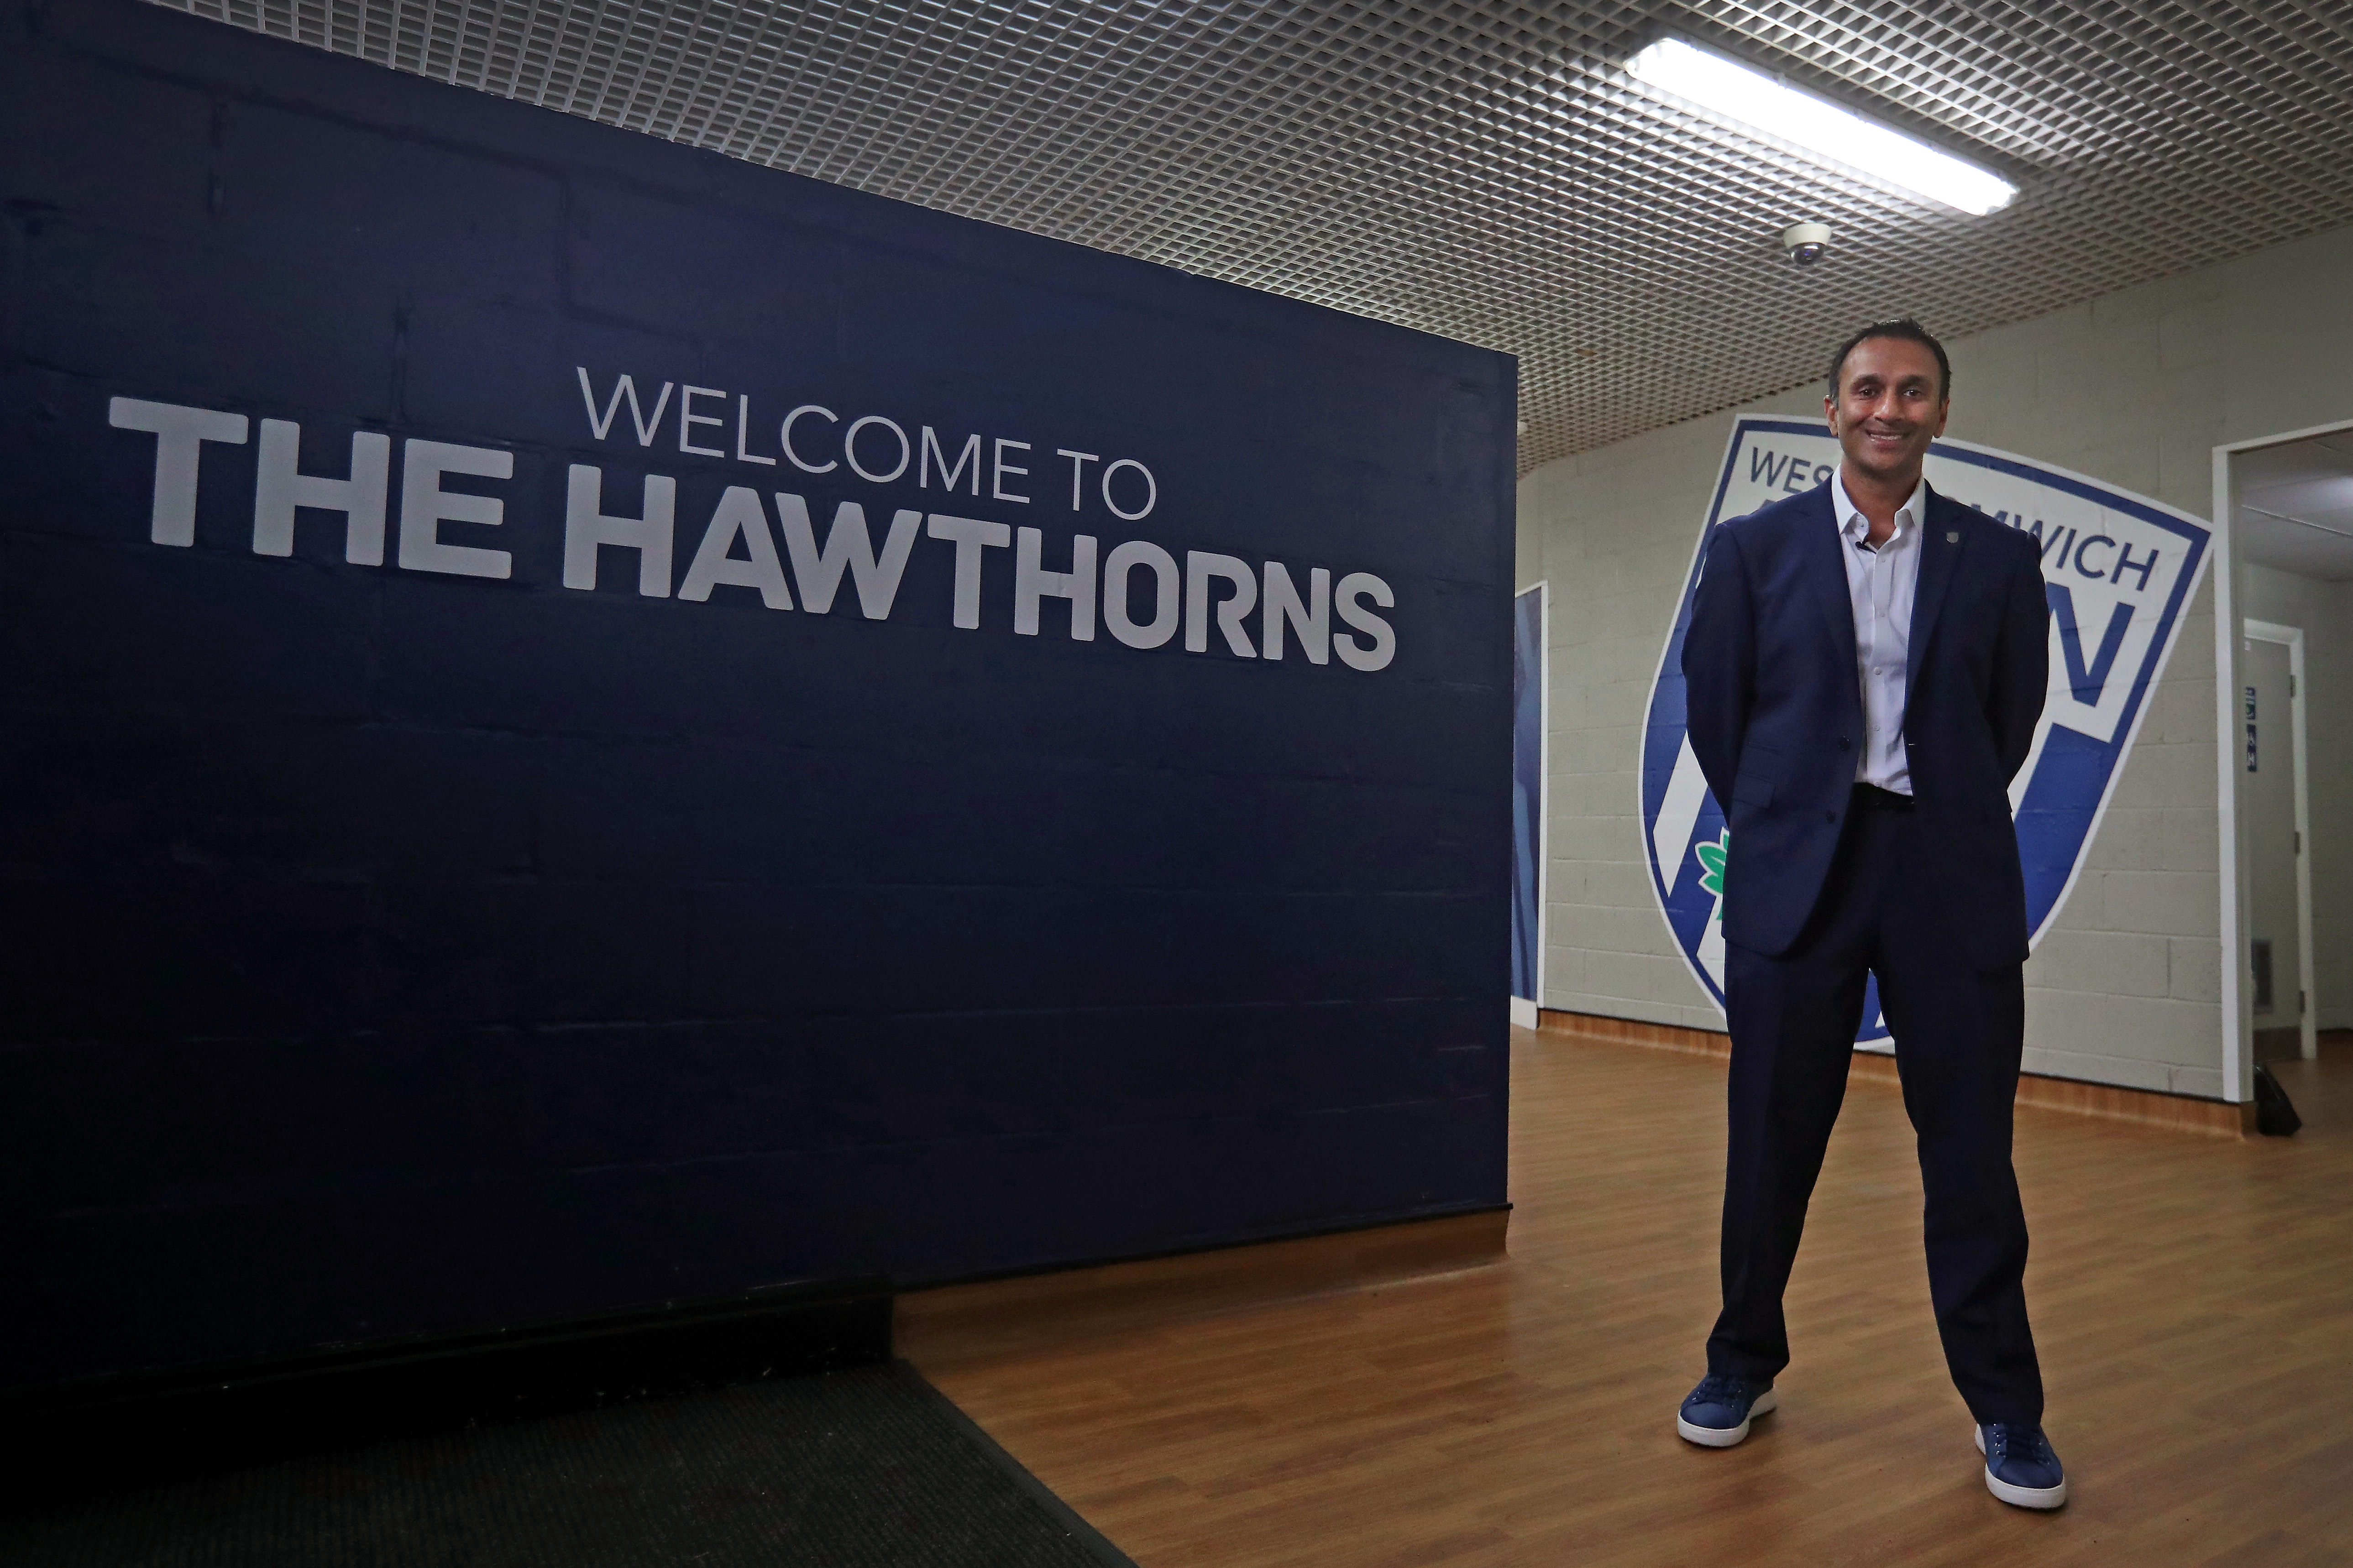 Shilen Patel smiling at the camera while wearing a suit and stood next to a wall with "Welcome to The Hawthorns" written on it